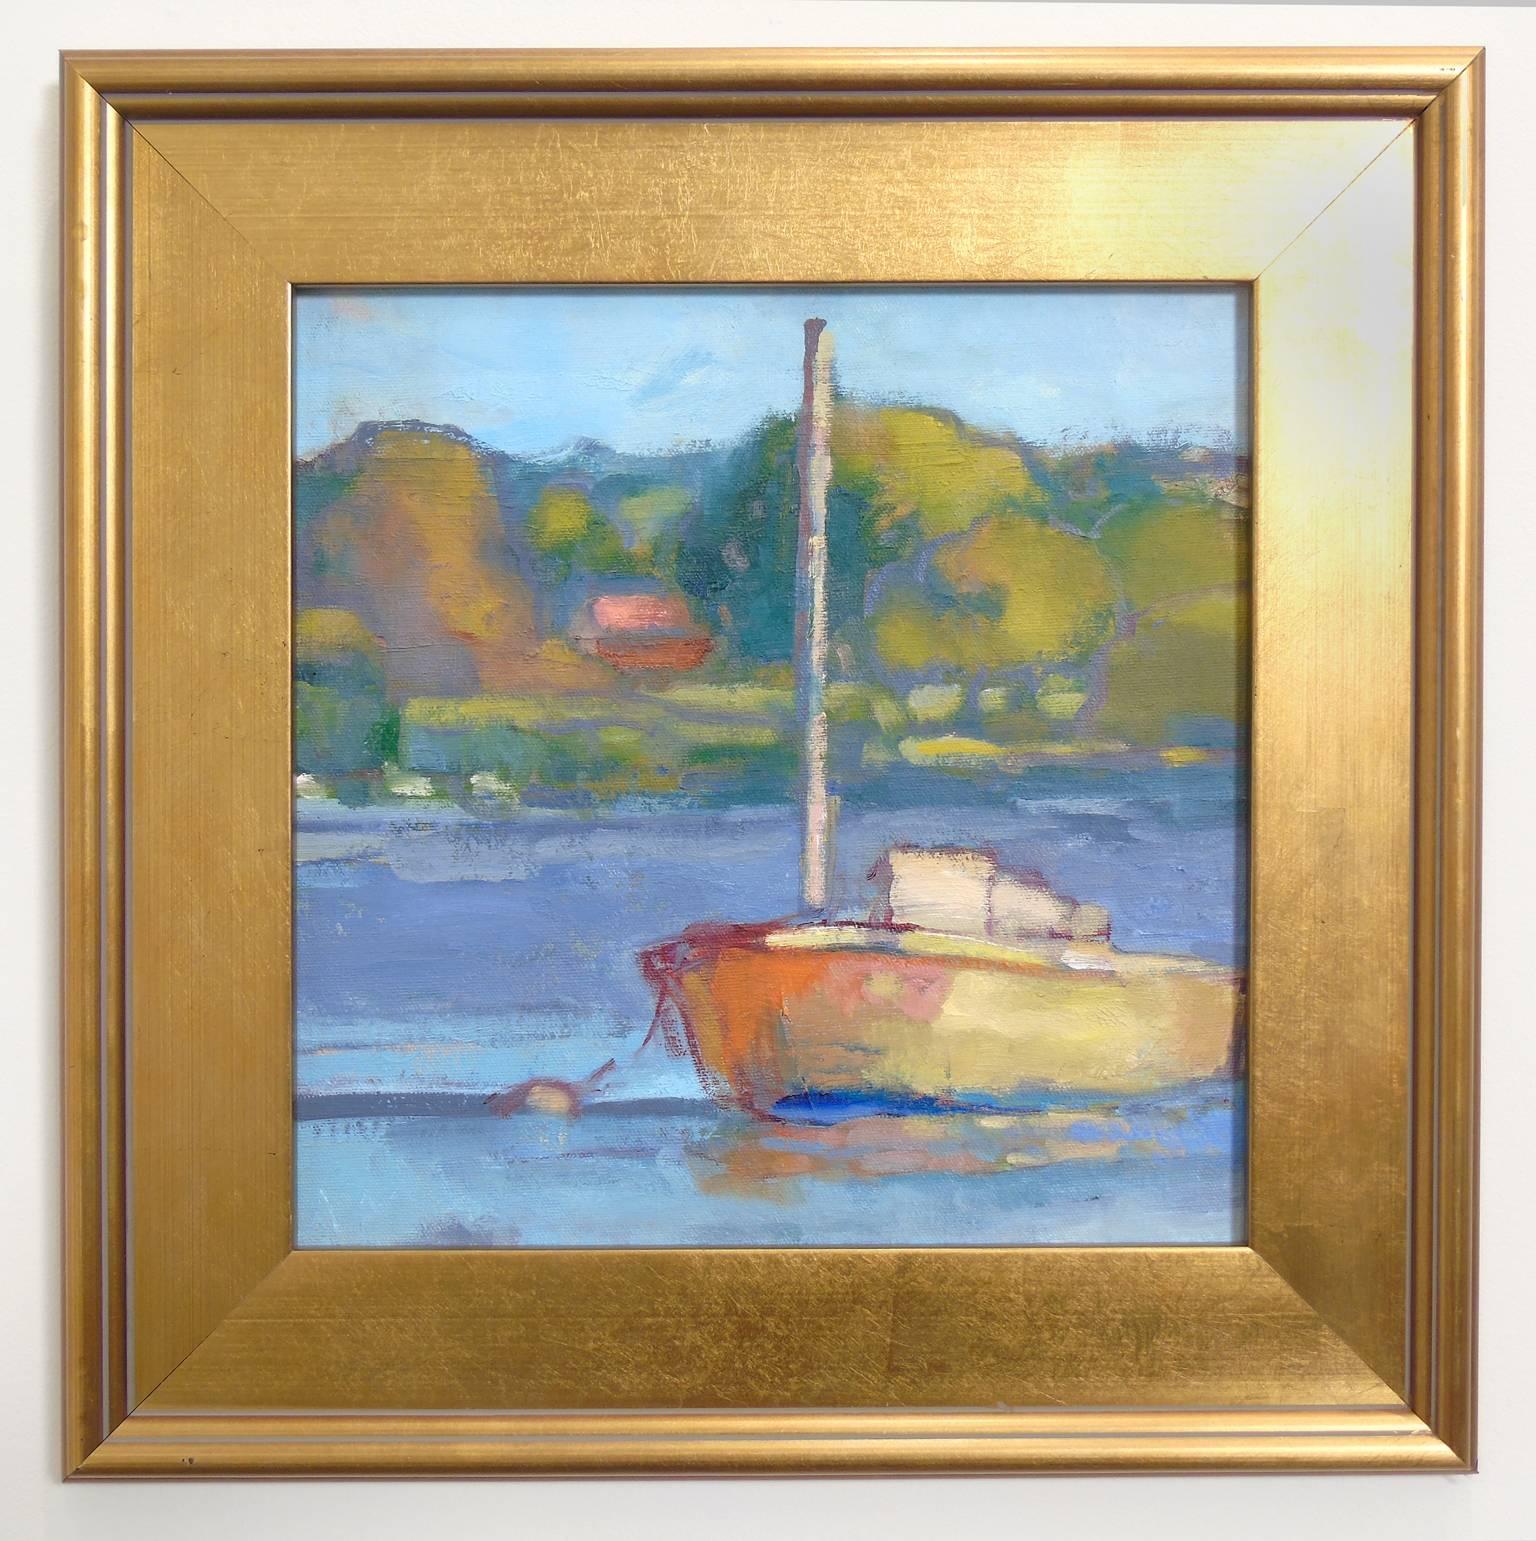 Boat at Rest - Contemporary Painting by Robert Glisson